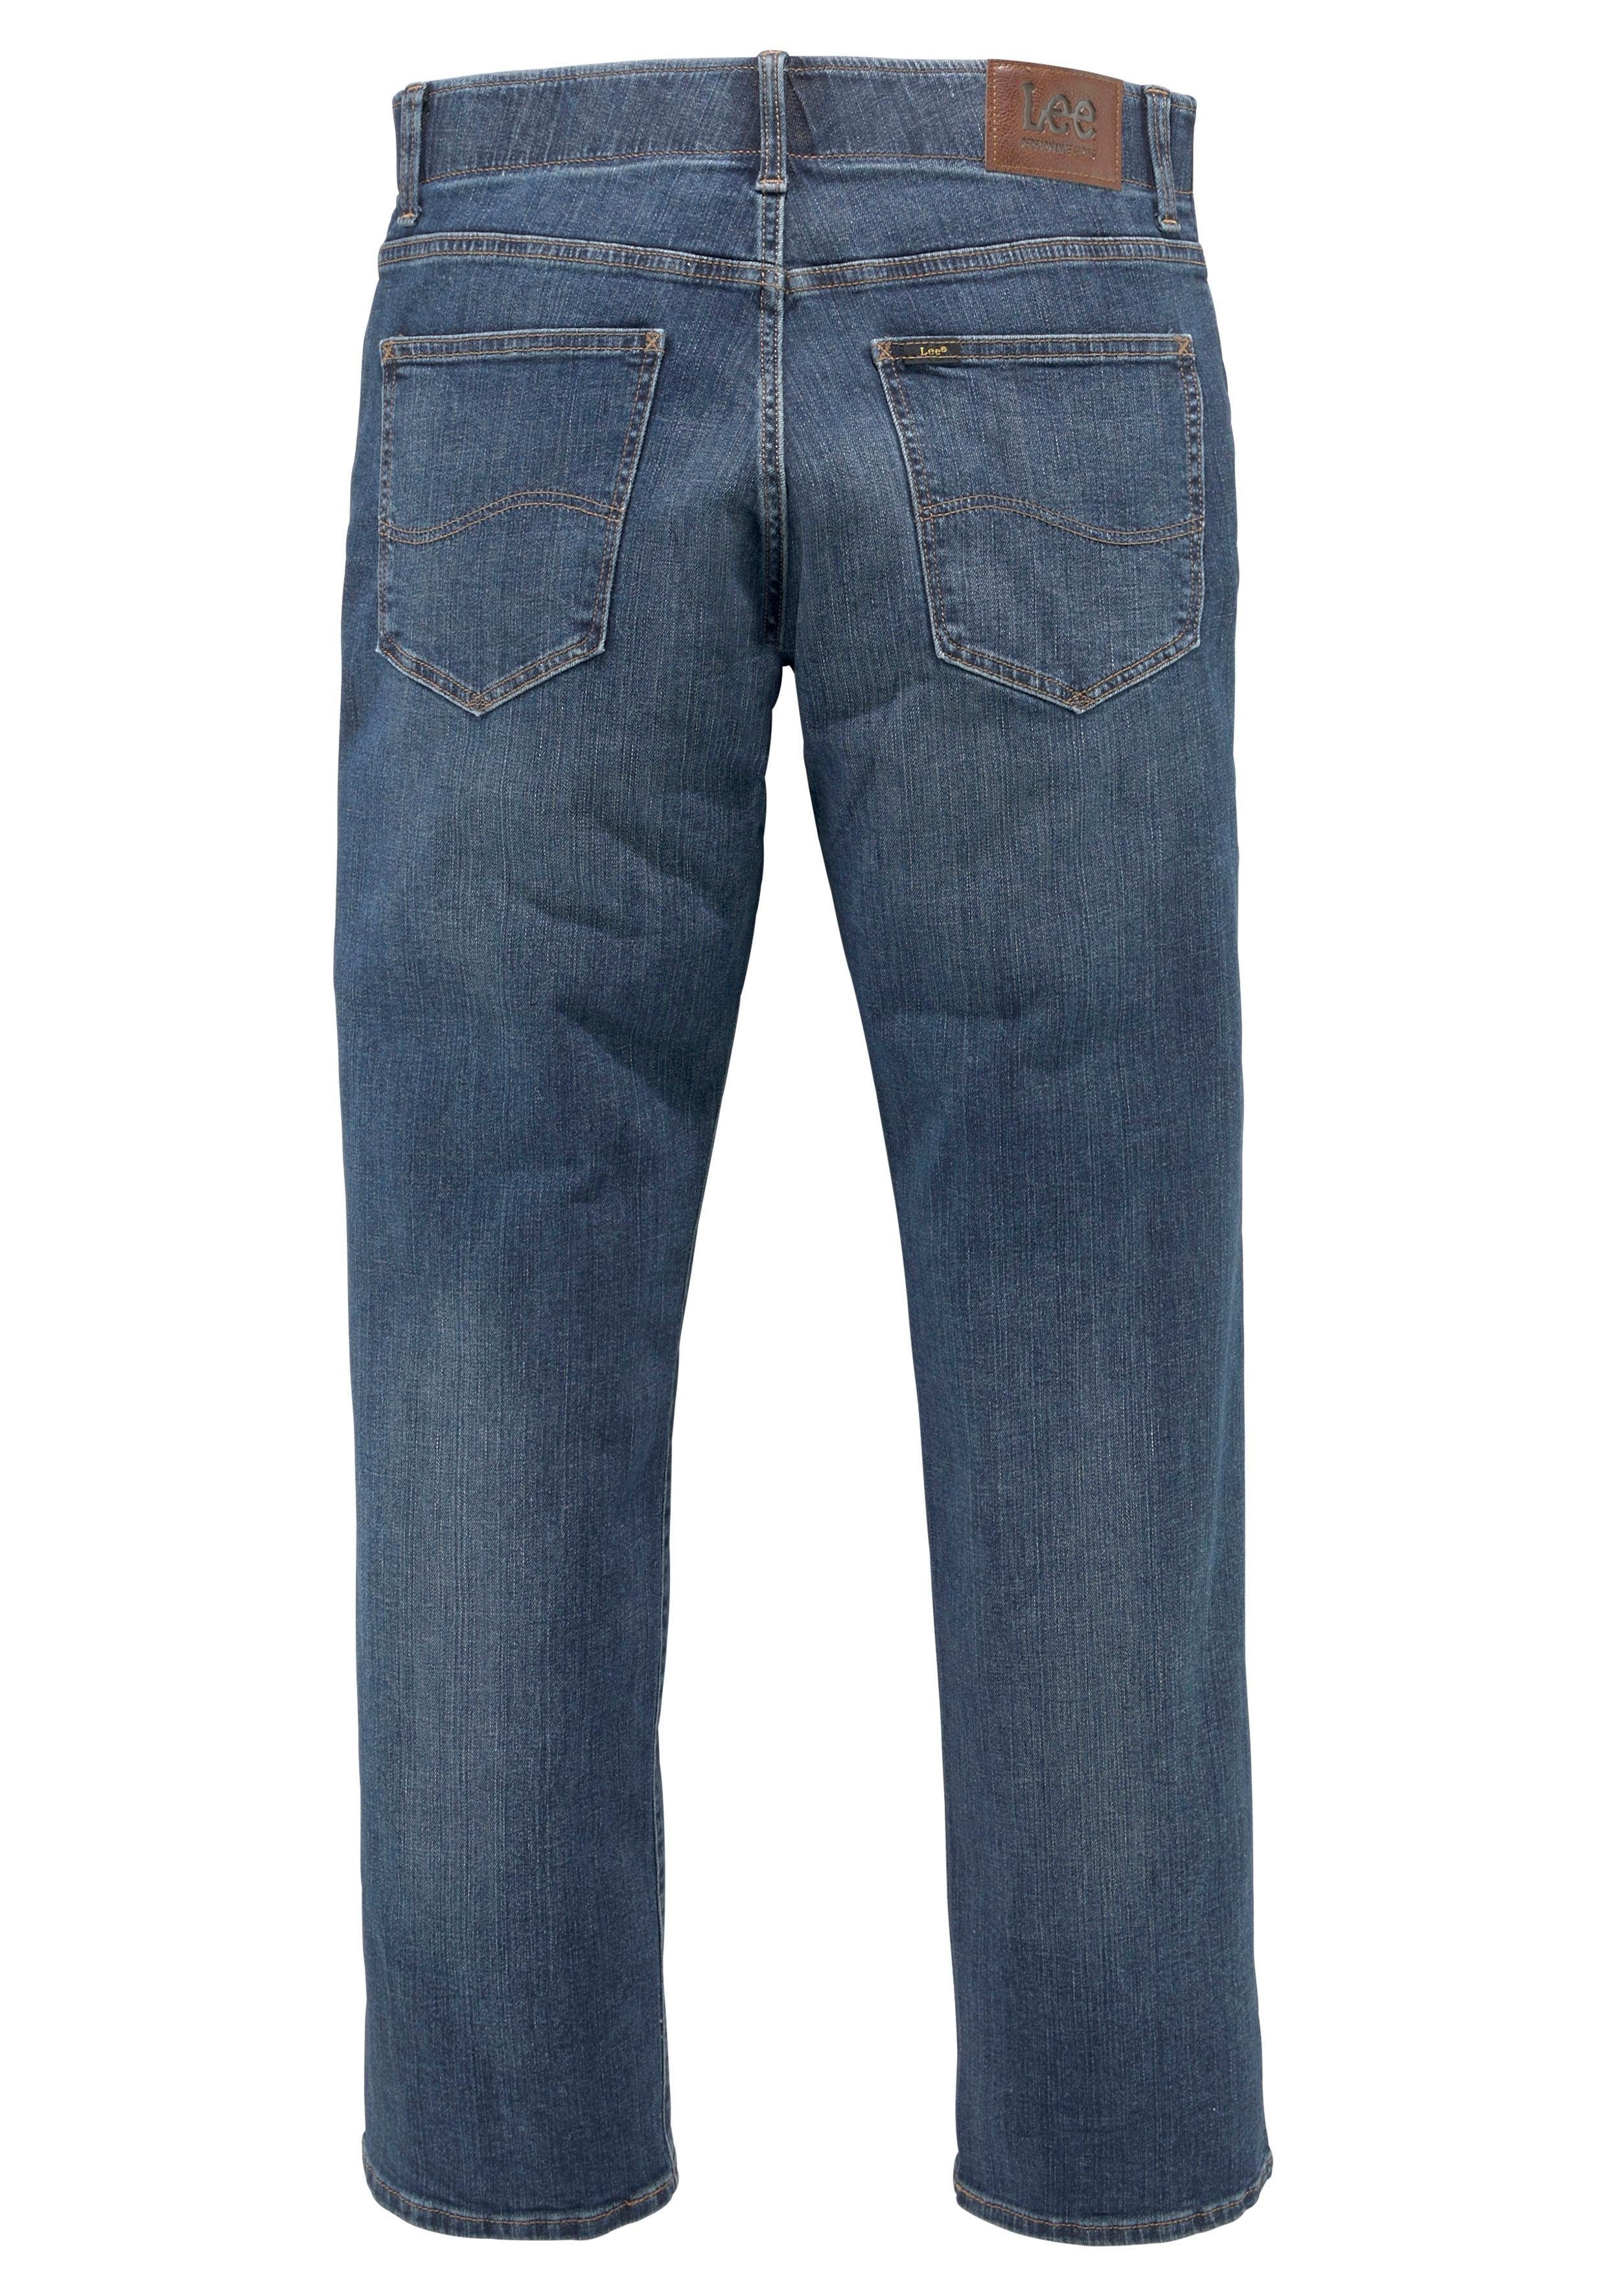 lee extreme motion jeans